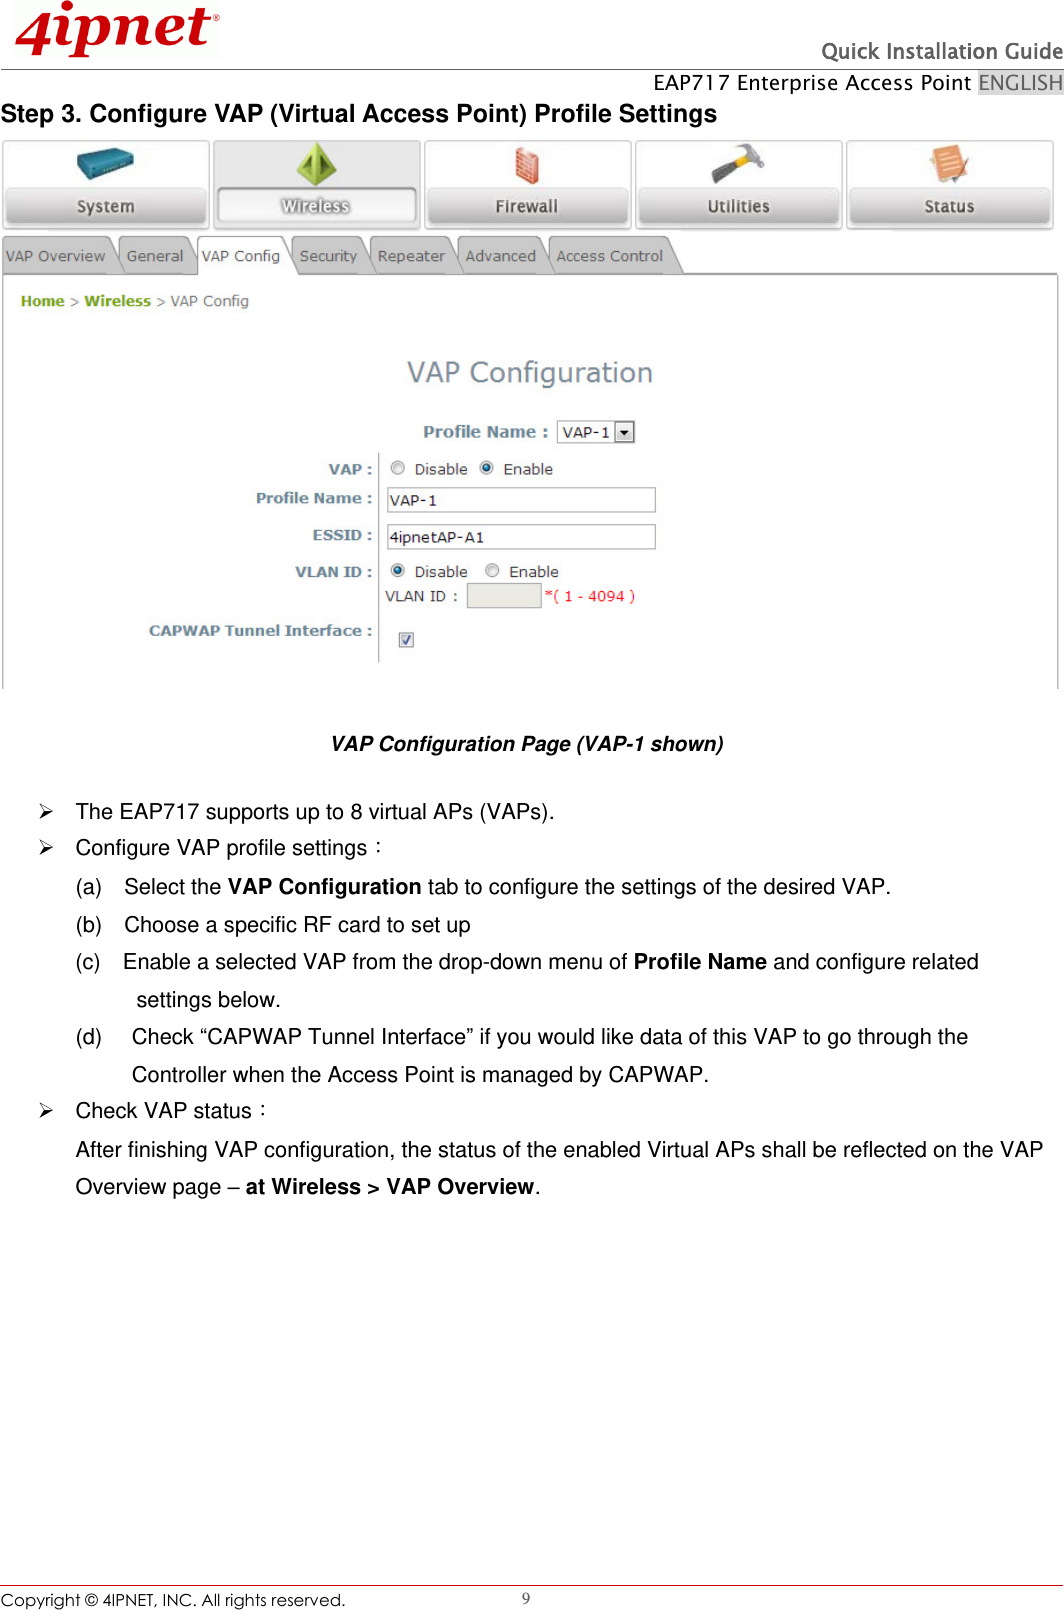  Quick Installation Guide EAP717 Enterprise Access Point ENGLISH Copyright ©  4IPNET, INC. All rights reserved.                                                              9 Step 3. Configure VAP (Virtual Access Point) Profile Settings  VAP Configuration Page (VAP-1 shown)   The EAP717 supports up to 8 virtual APs (VAPs).       Configure VAP profile settings： (a)    Select the VAP Configuration tab to configure the settings of the desired VAP.   (b)  Choose a specific RF card to set up   (c)  Enable a selected VAP from the drop-down menu of Profile Name and configure related      settings below. (d)    Check “CAPWAP Tunnel Interface” if you would like data of this VAP to go through the Controller when the Access Point is managed by CAPWAP.     Check VAP status： After finishing VAP configuration, the status of the enabled Virtual APs shall be reflected on the VAP Overview page – at Wireless &gt; VAP Overview.   